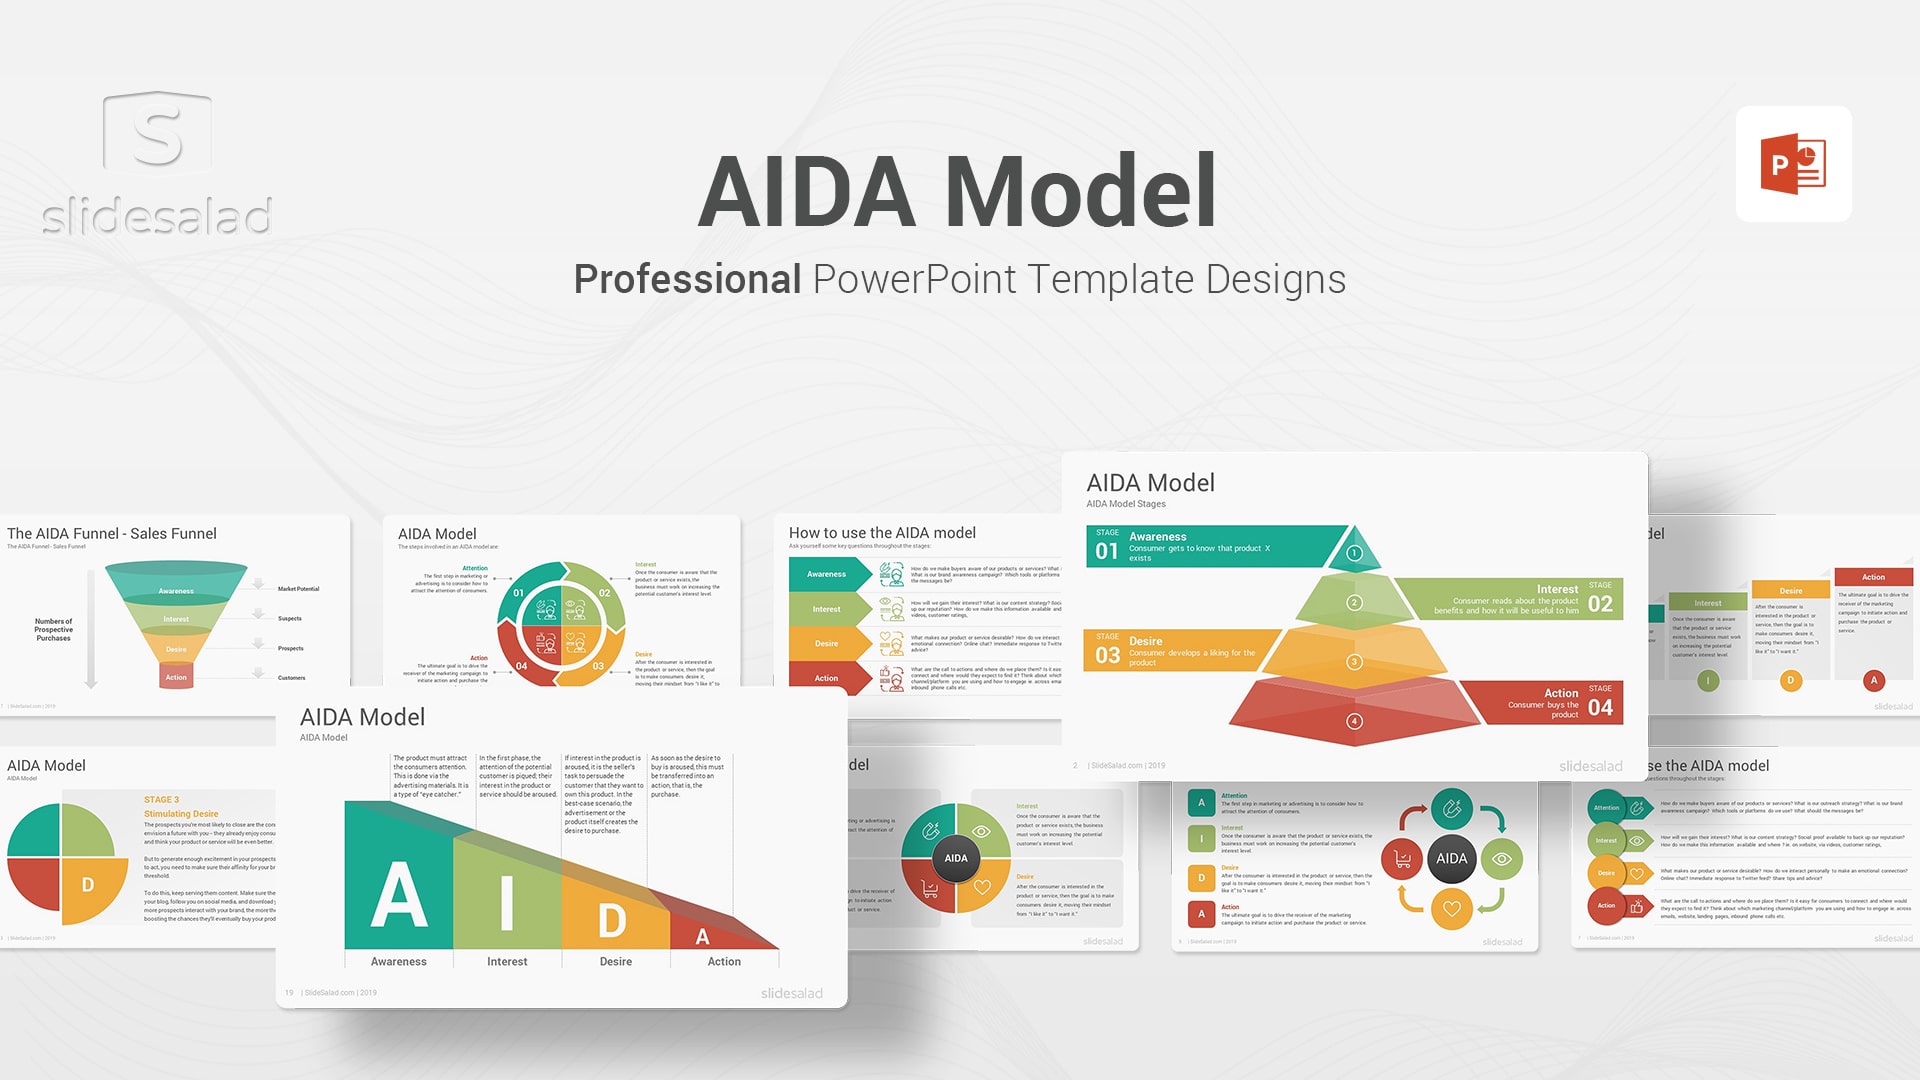 AIDA Model PowerPoint Templates Diagrams - Interest, Desire, and Action Sales and Marketing PowerPoint Template